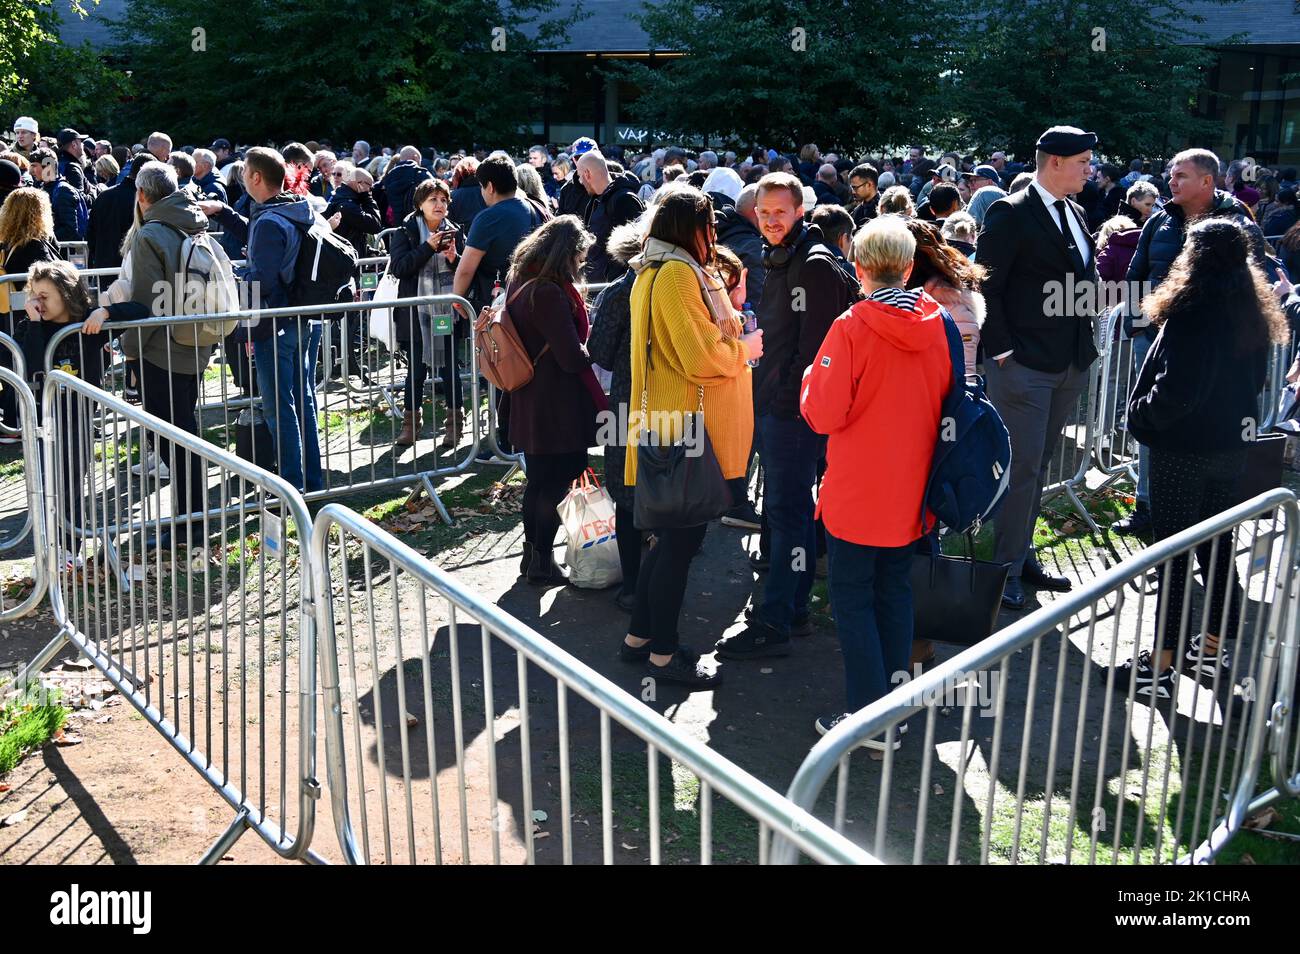 London, UK. Potters Fields Park, near Tower Bridge. The queue for Queen Elizabeth II's Lying-in-State stretched from Southwark Park to Westminster Hall taking up to 14 hours to reach it's destination. Credit: michael melia/Alamy Live News Stock Photo